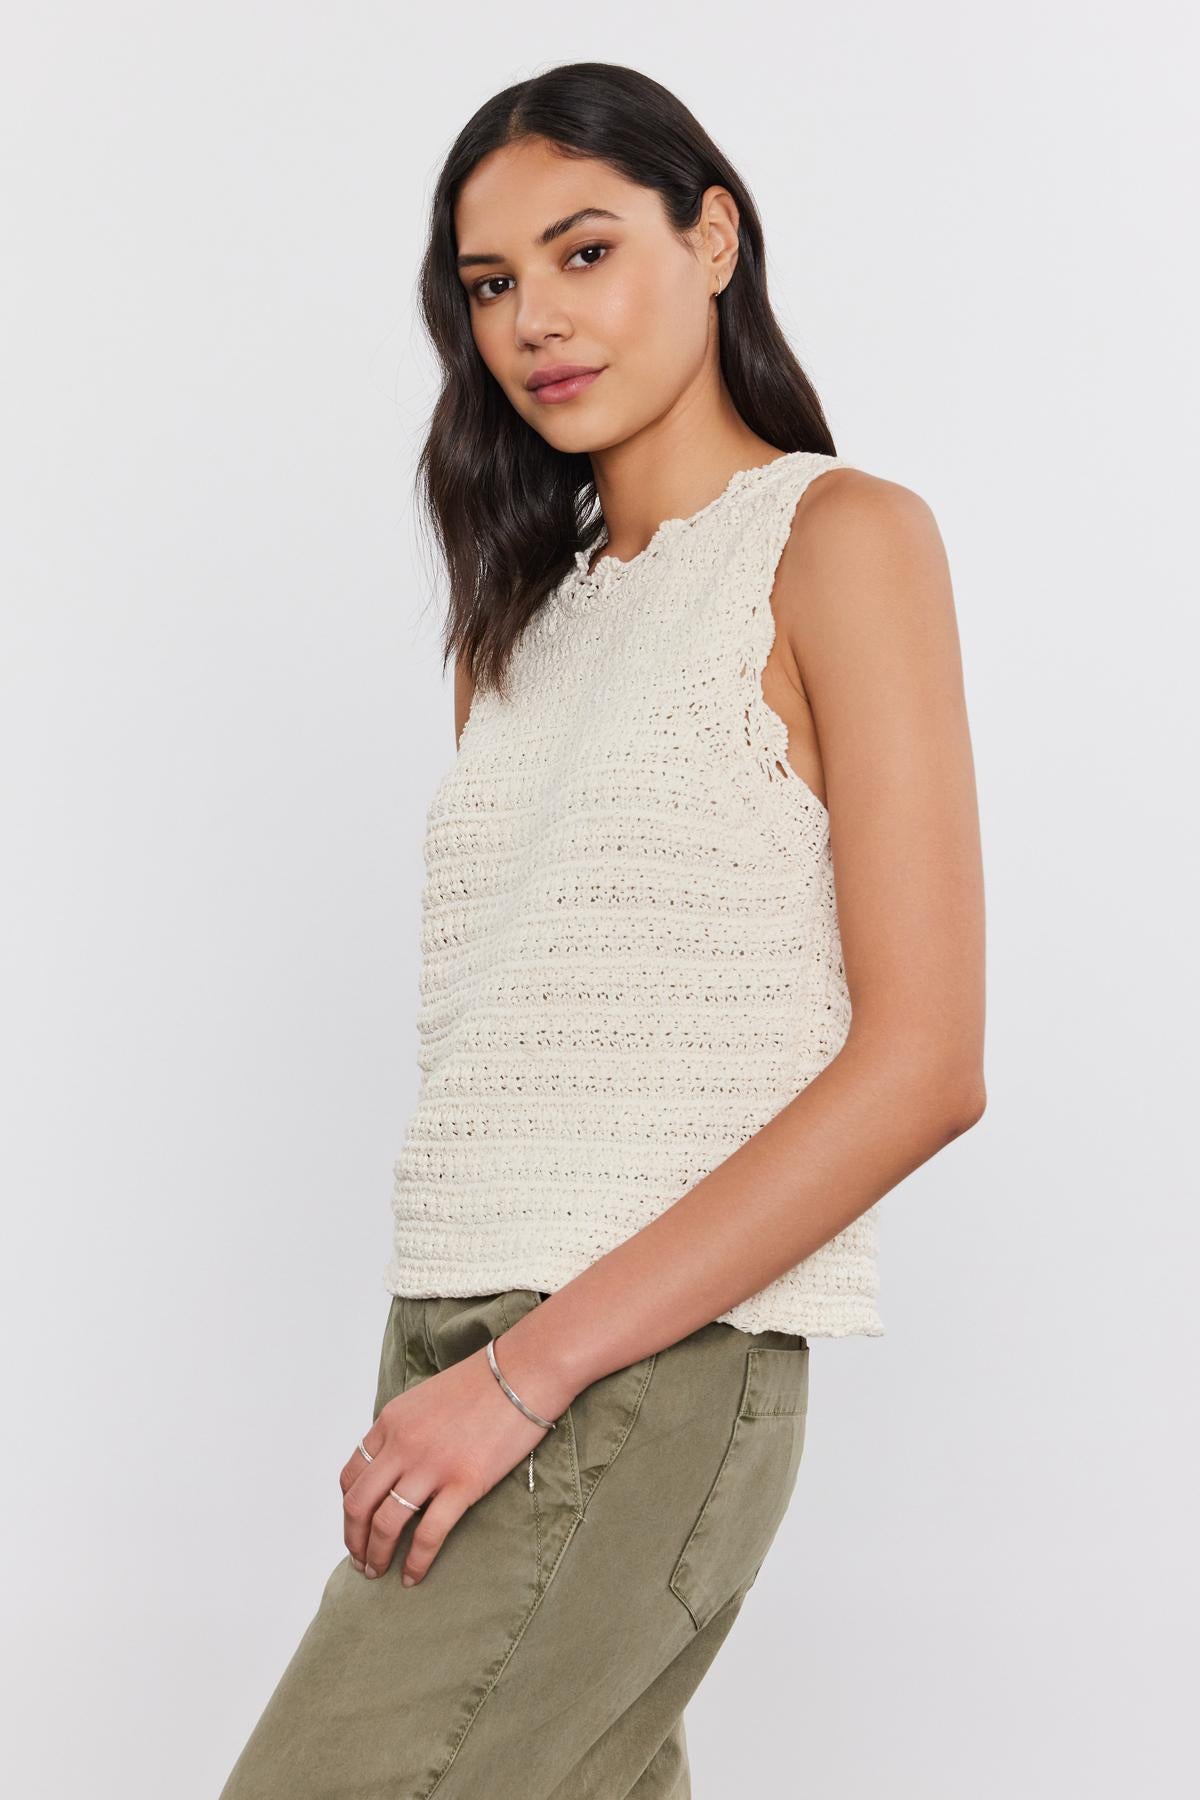   A woman with long dark hair wears an off-white Velvet by Graham & Spencer SOPHIE SWEATER VEST featuring scallop details and olive green pants, posing against a plain white background. 